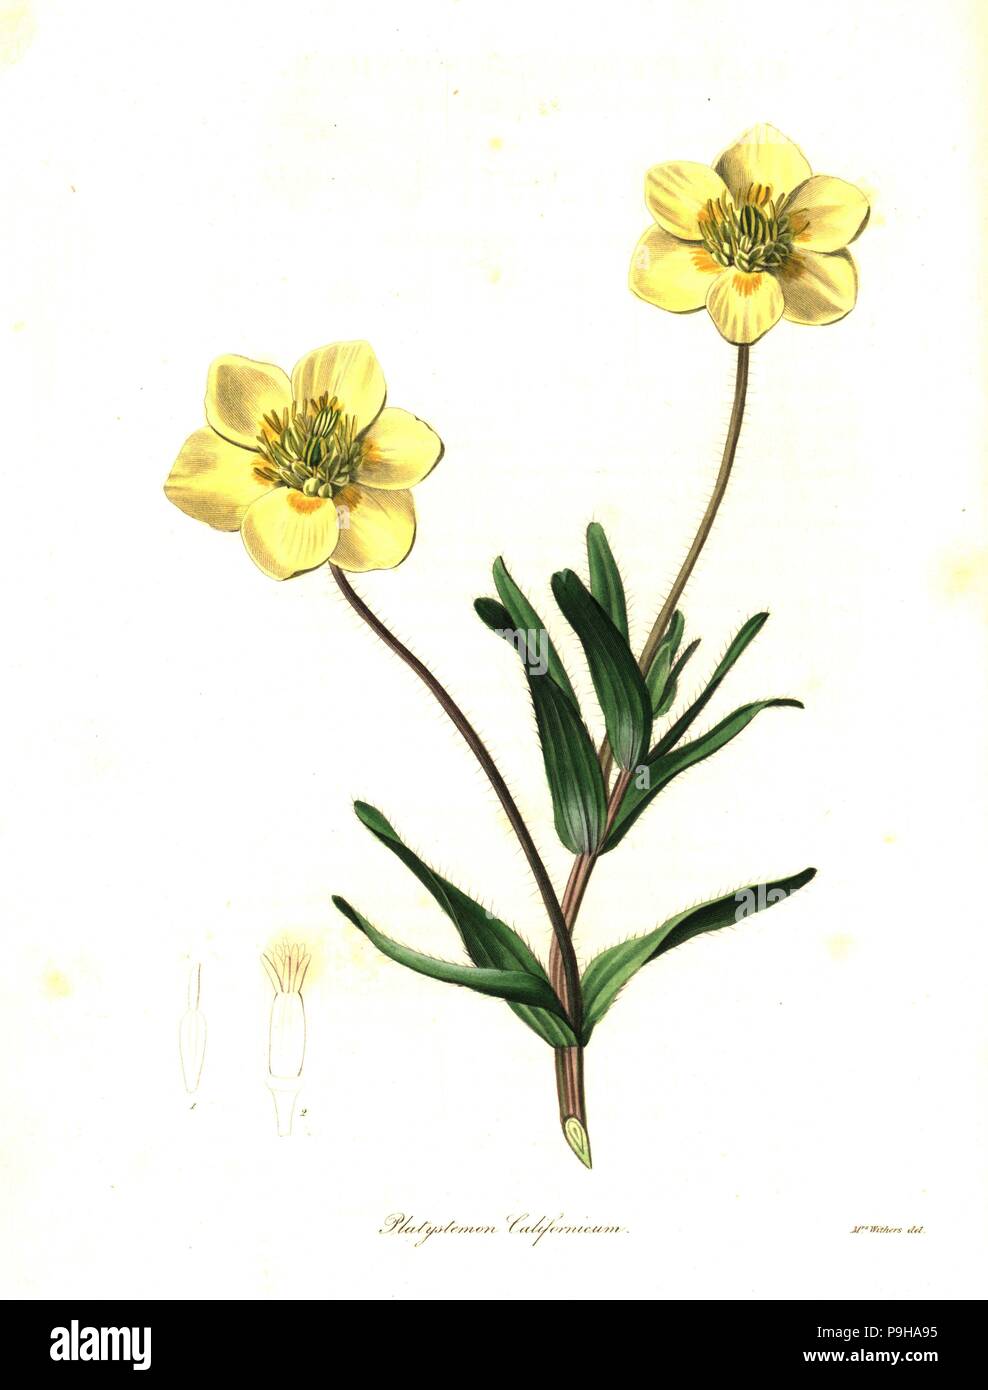 Creamcups or Californian platystemon, Platystemon californicus. Handcoloured copperplate engraving after a botanical illustration by Mrs Augusta Withers from Benjamin Maund and the Rev. John Stevens Henslow's The Botanist, London, 1836. Stock Photo